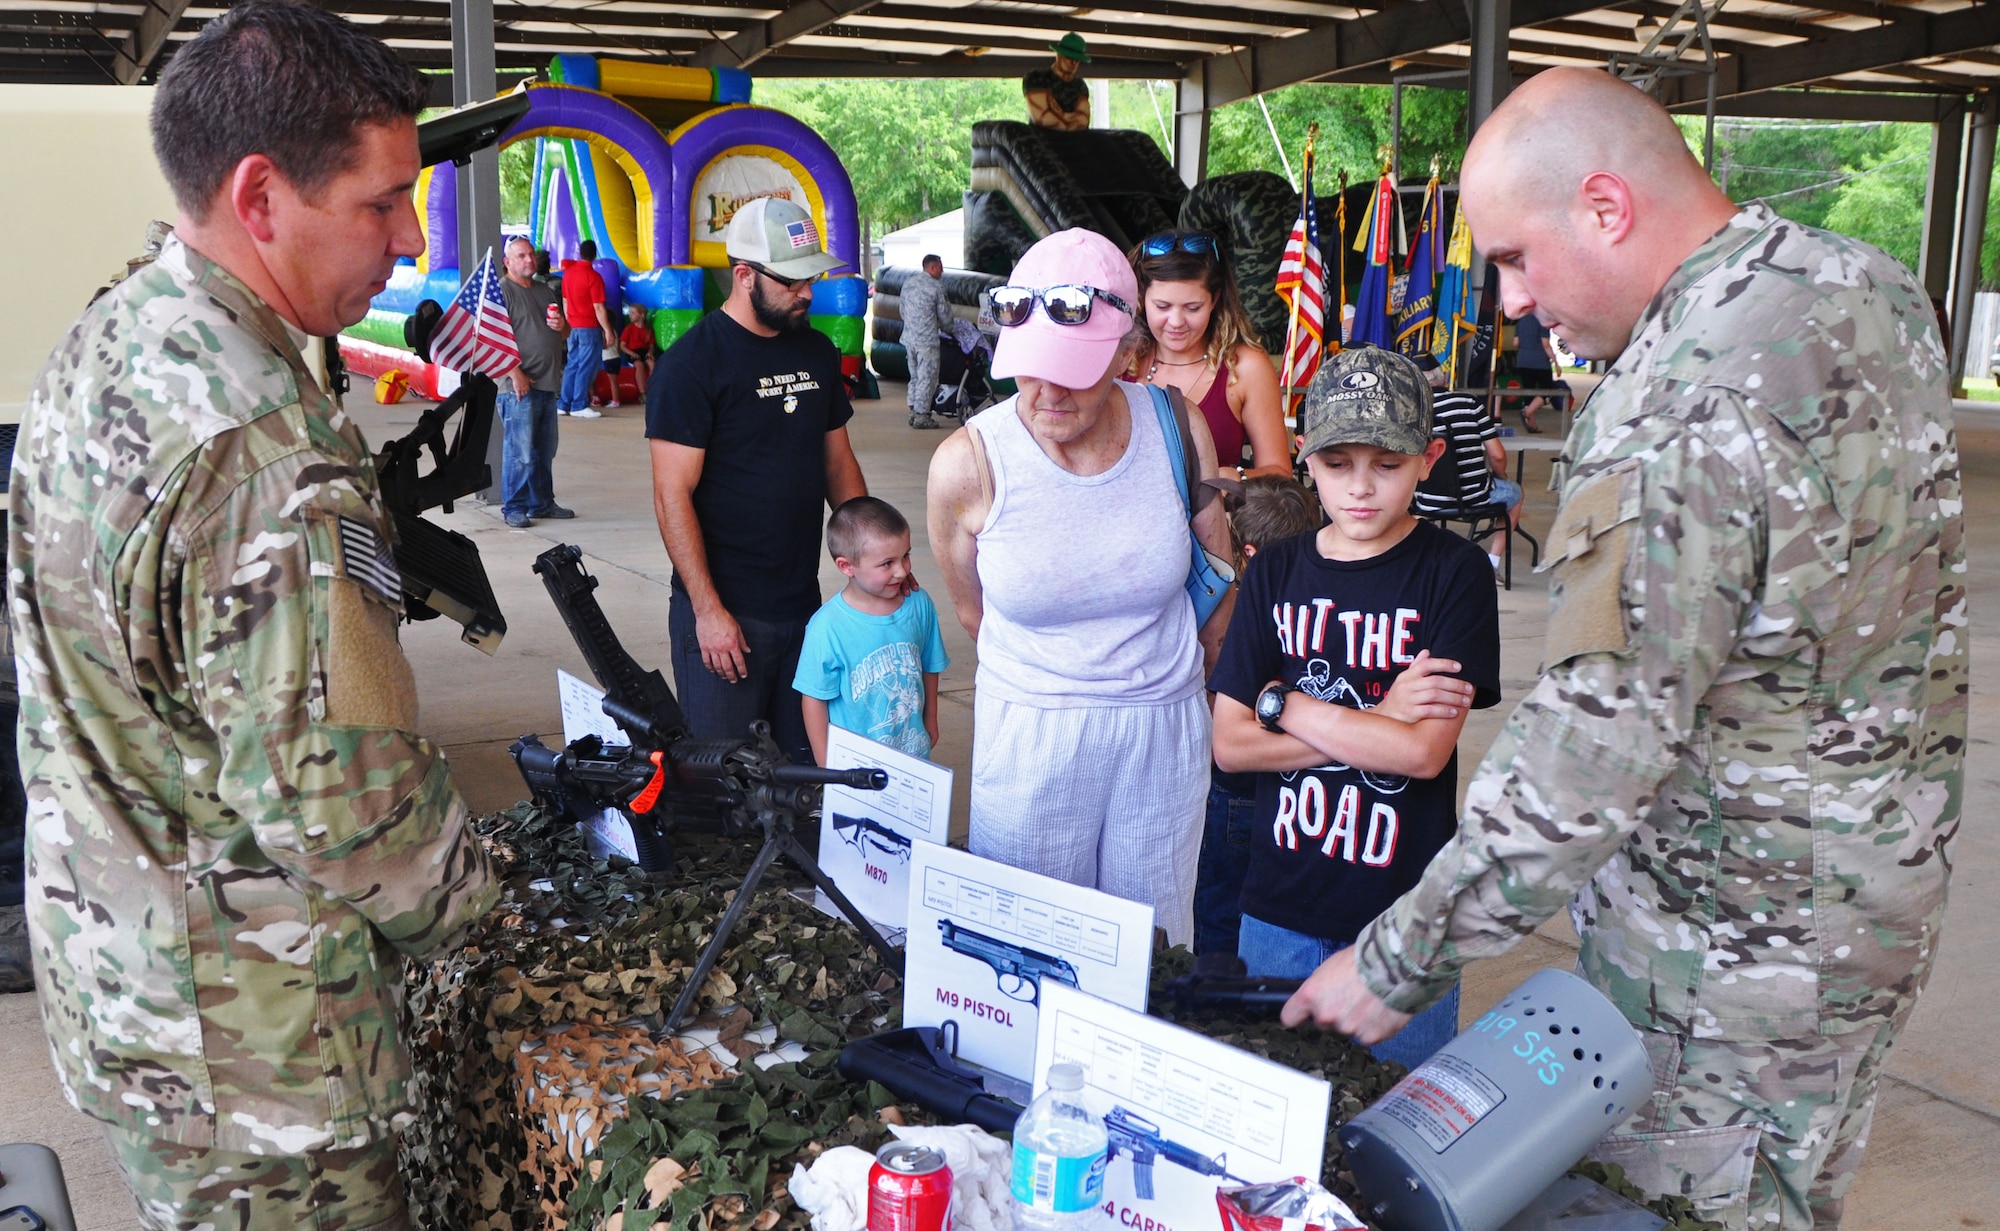 Tech. Sgt. Jonathan Inabnet and Staff Sgt. Brian Ploof, 919th Special Operations Security Forces Squadron, educate visitors about their weapons display at the Military Appreciation Recognition Celebration in Crestview, Fla., May 20, 2017. The annual event affords a unique opportunity for Crestview area citizens to meet military members and thank them for their service in national defense. (U.S. Air Force photo/Dan Neely)